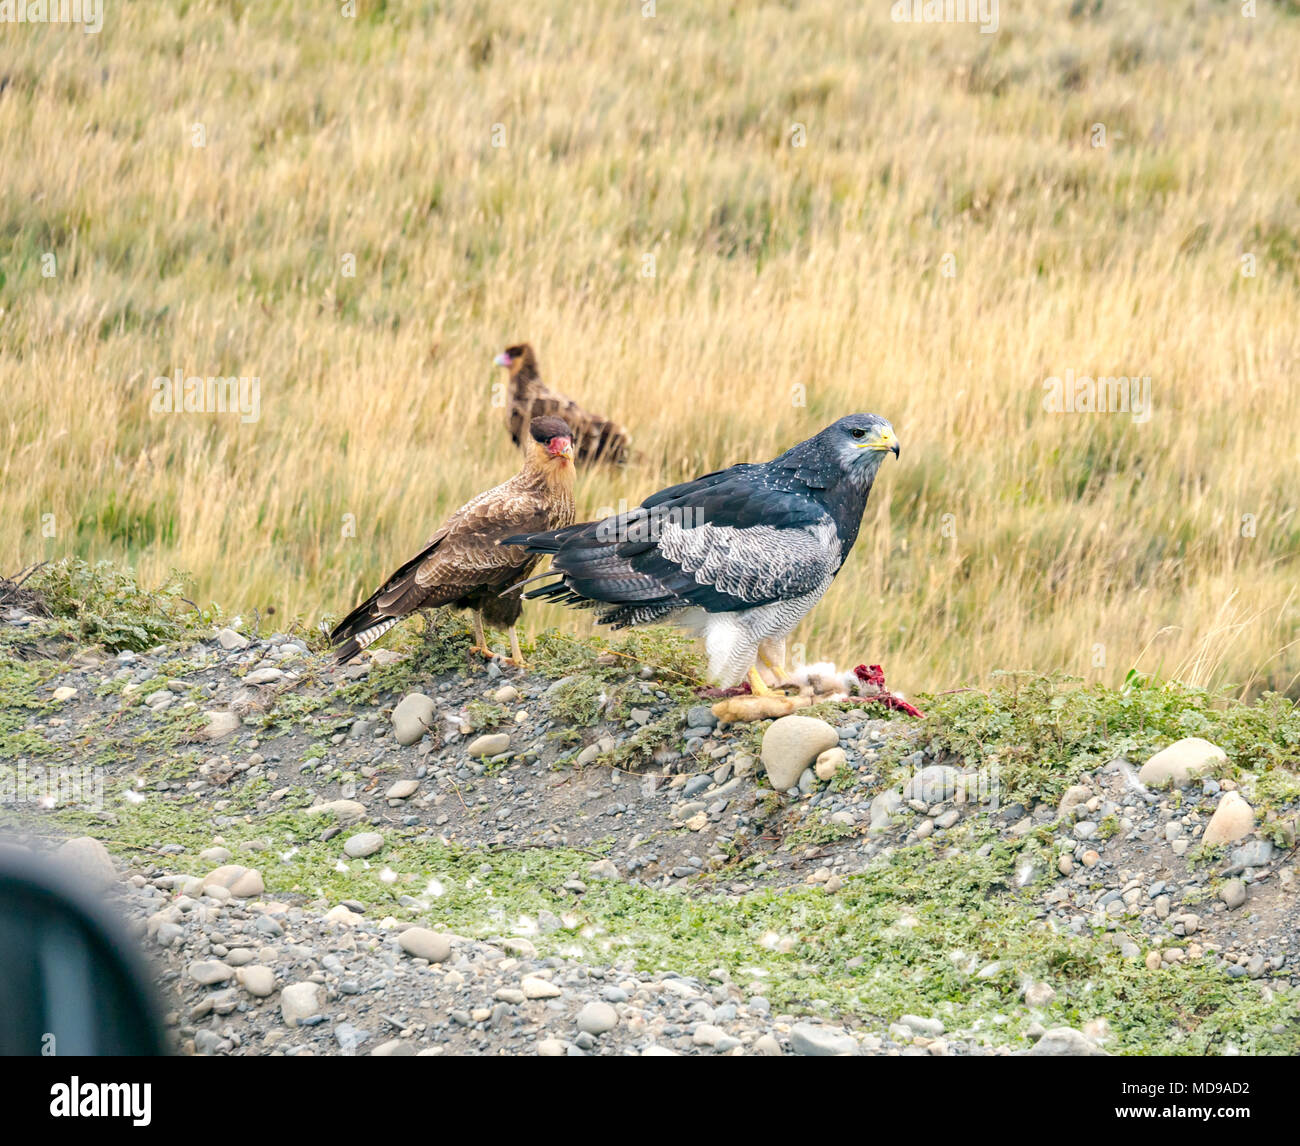 Black chested buzzard eagle $ Southern crested caracaras with roadkill, Torres del Paine National Park, Patagonia, Chile, South America Stock Photo